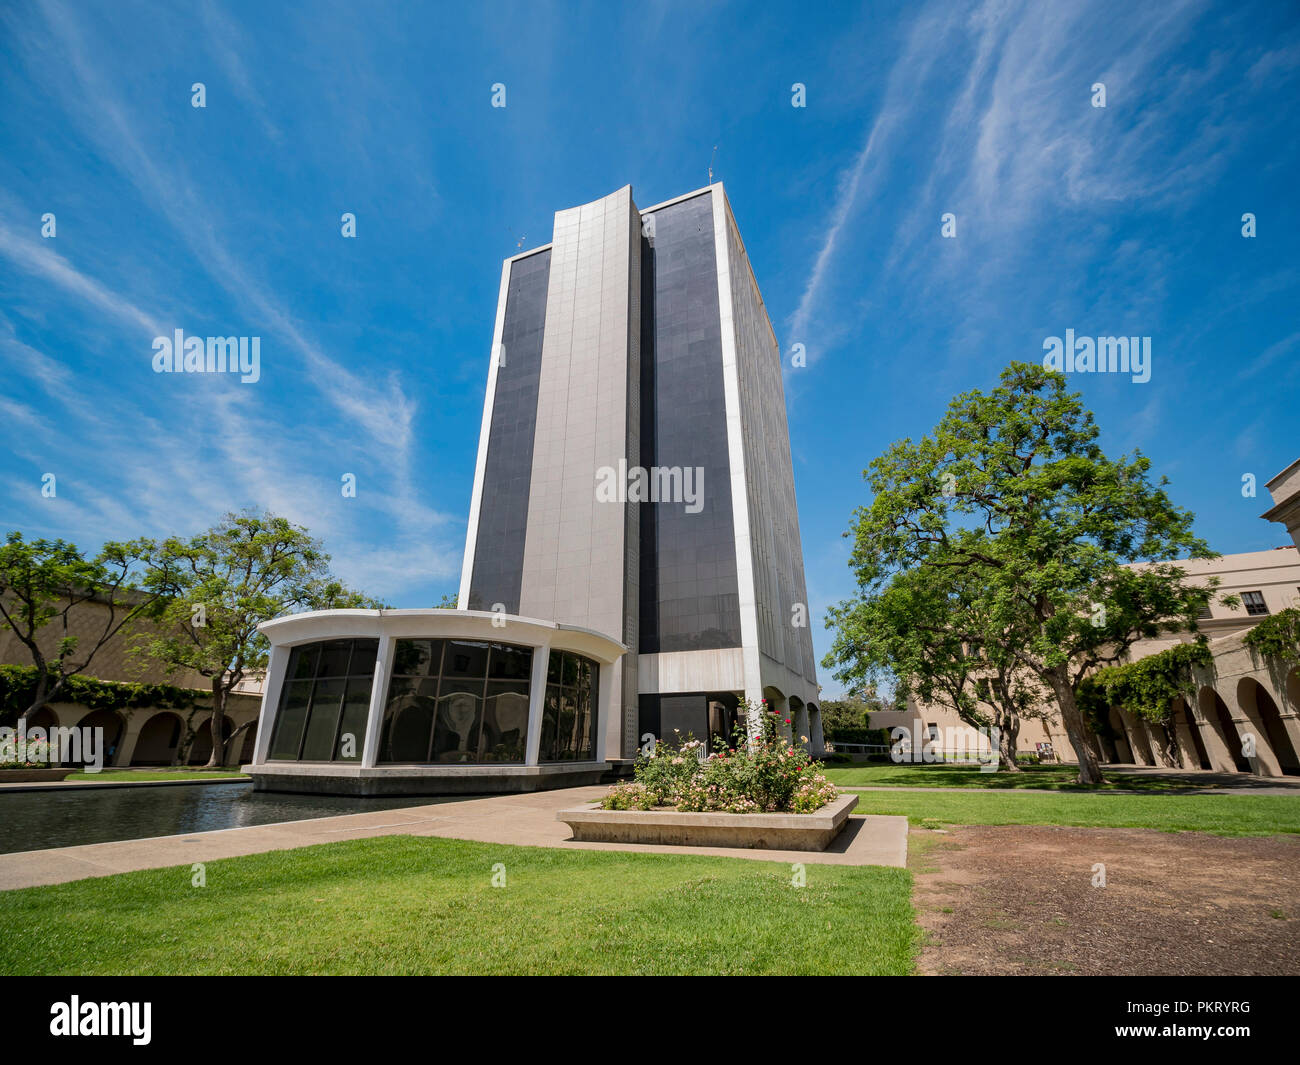 Los Angeles, JUL 21: Exterior view of the Millikan Library in Caltech on JUL 21, 2018 at Los Angeles, California Stock Photo